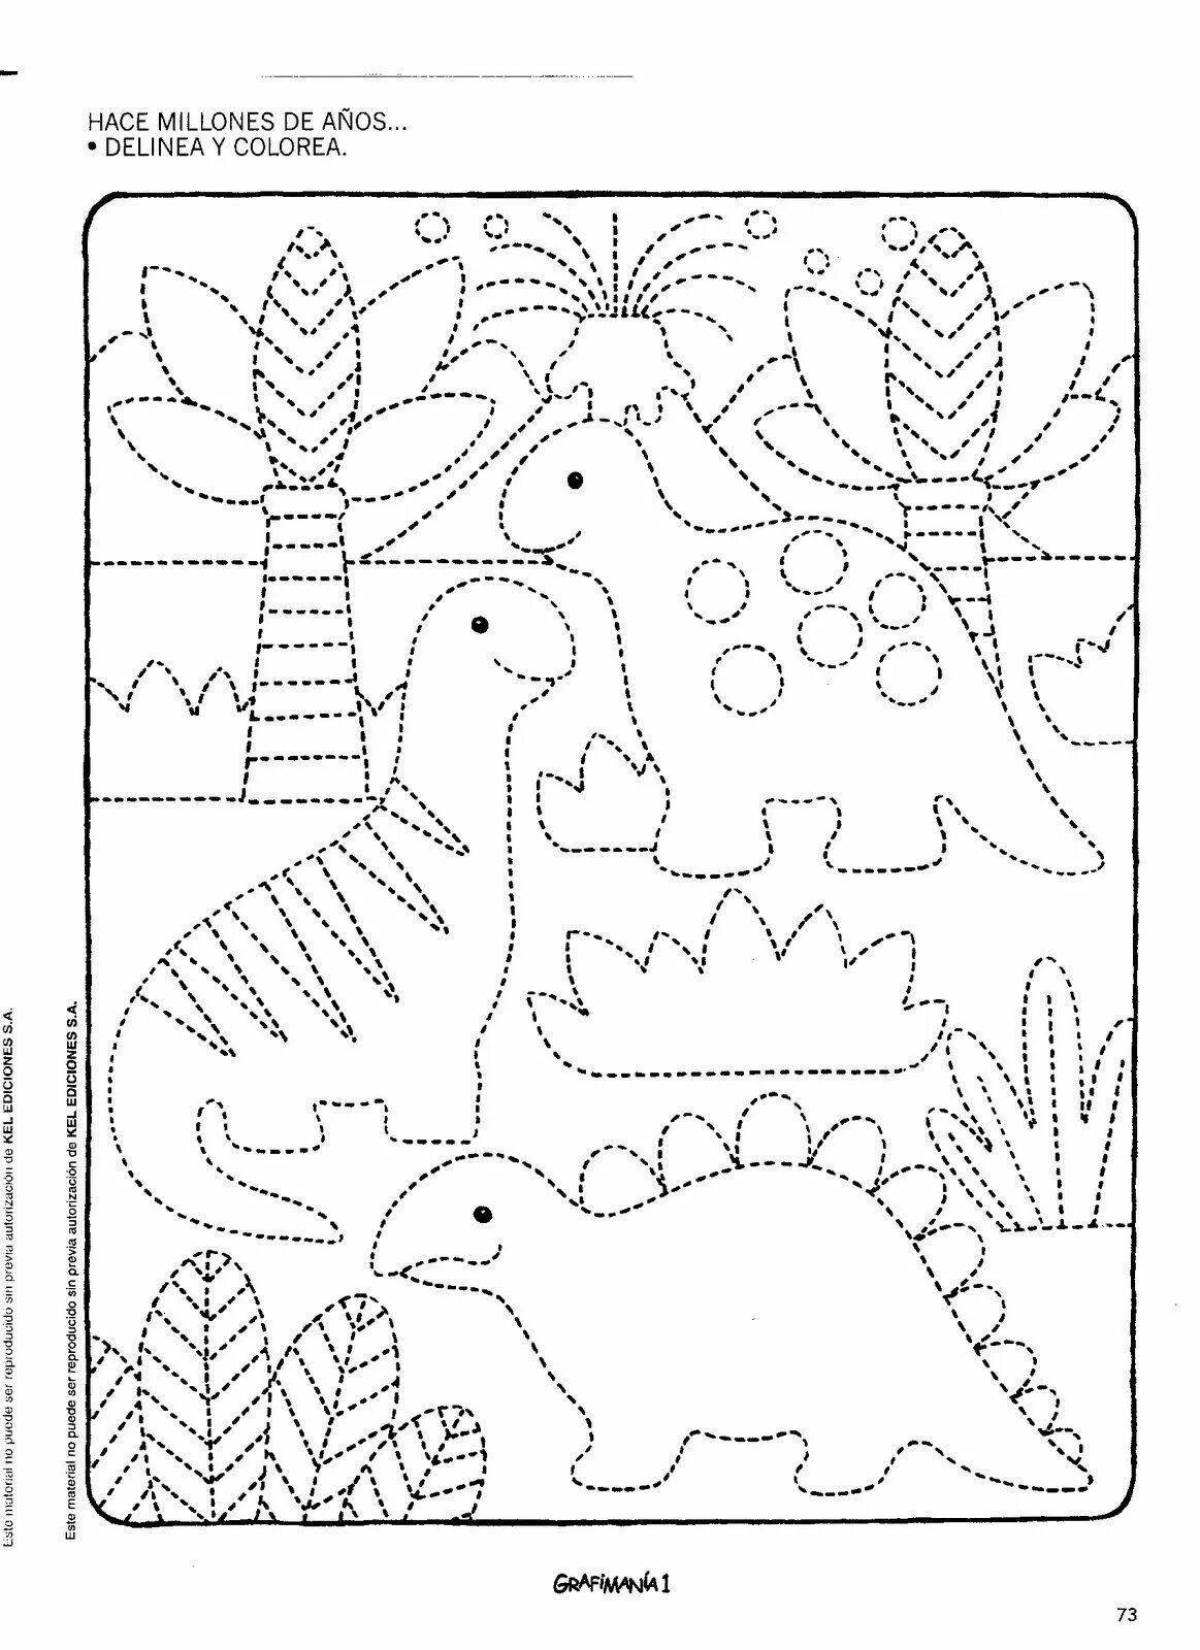 Colorful coloring book for developing motor skills